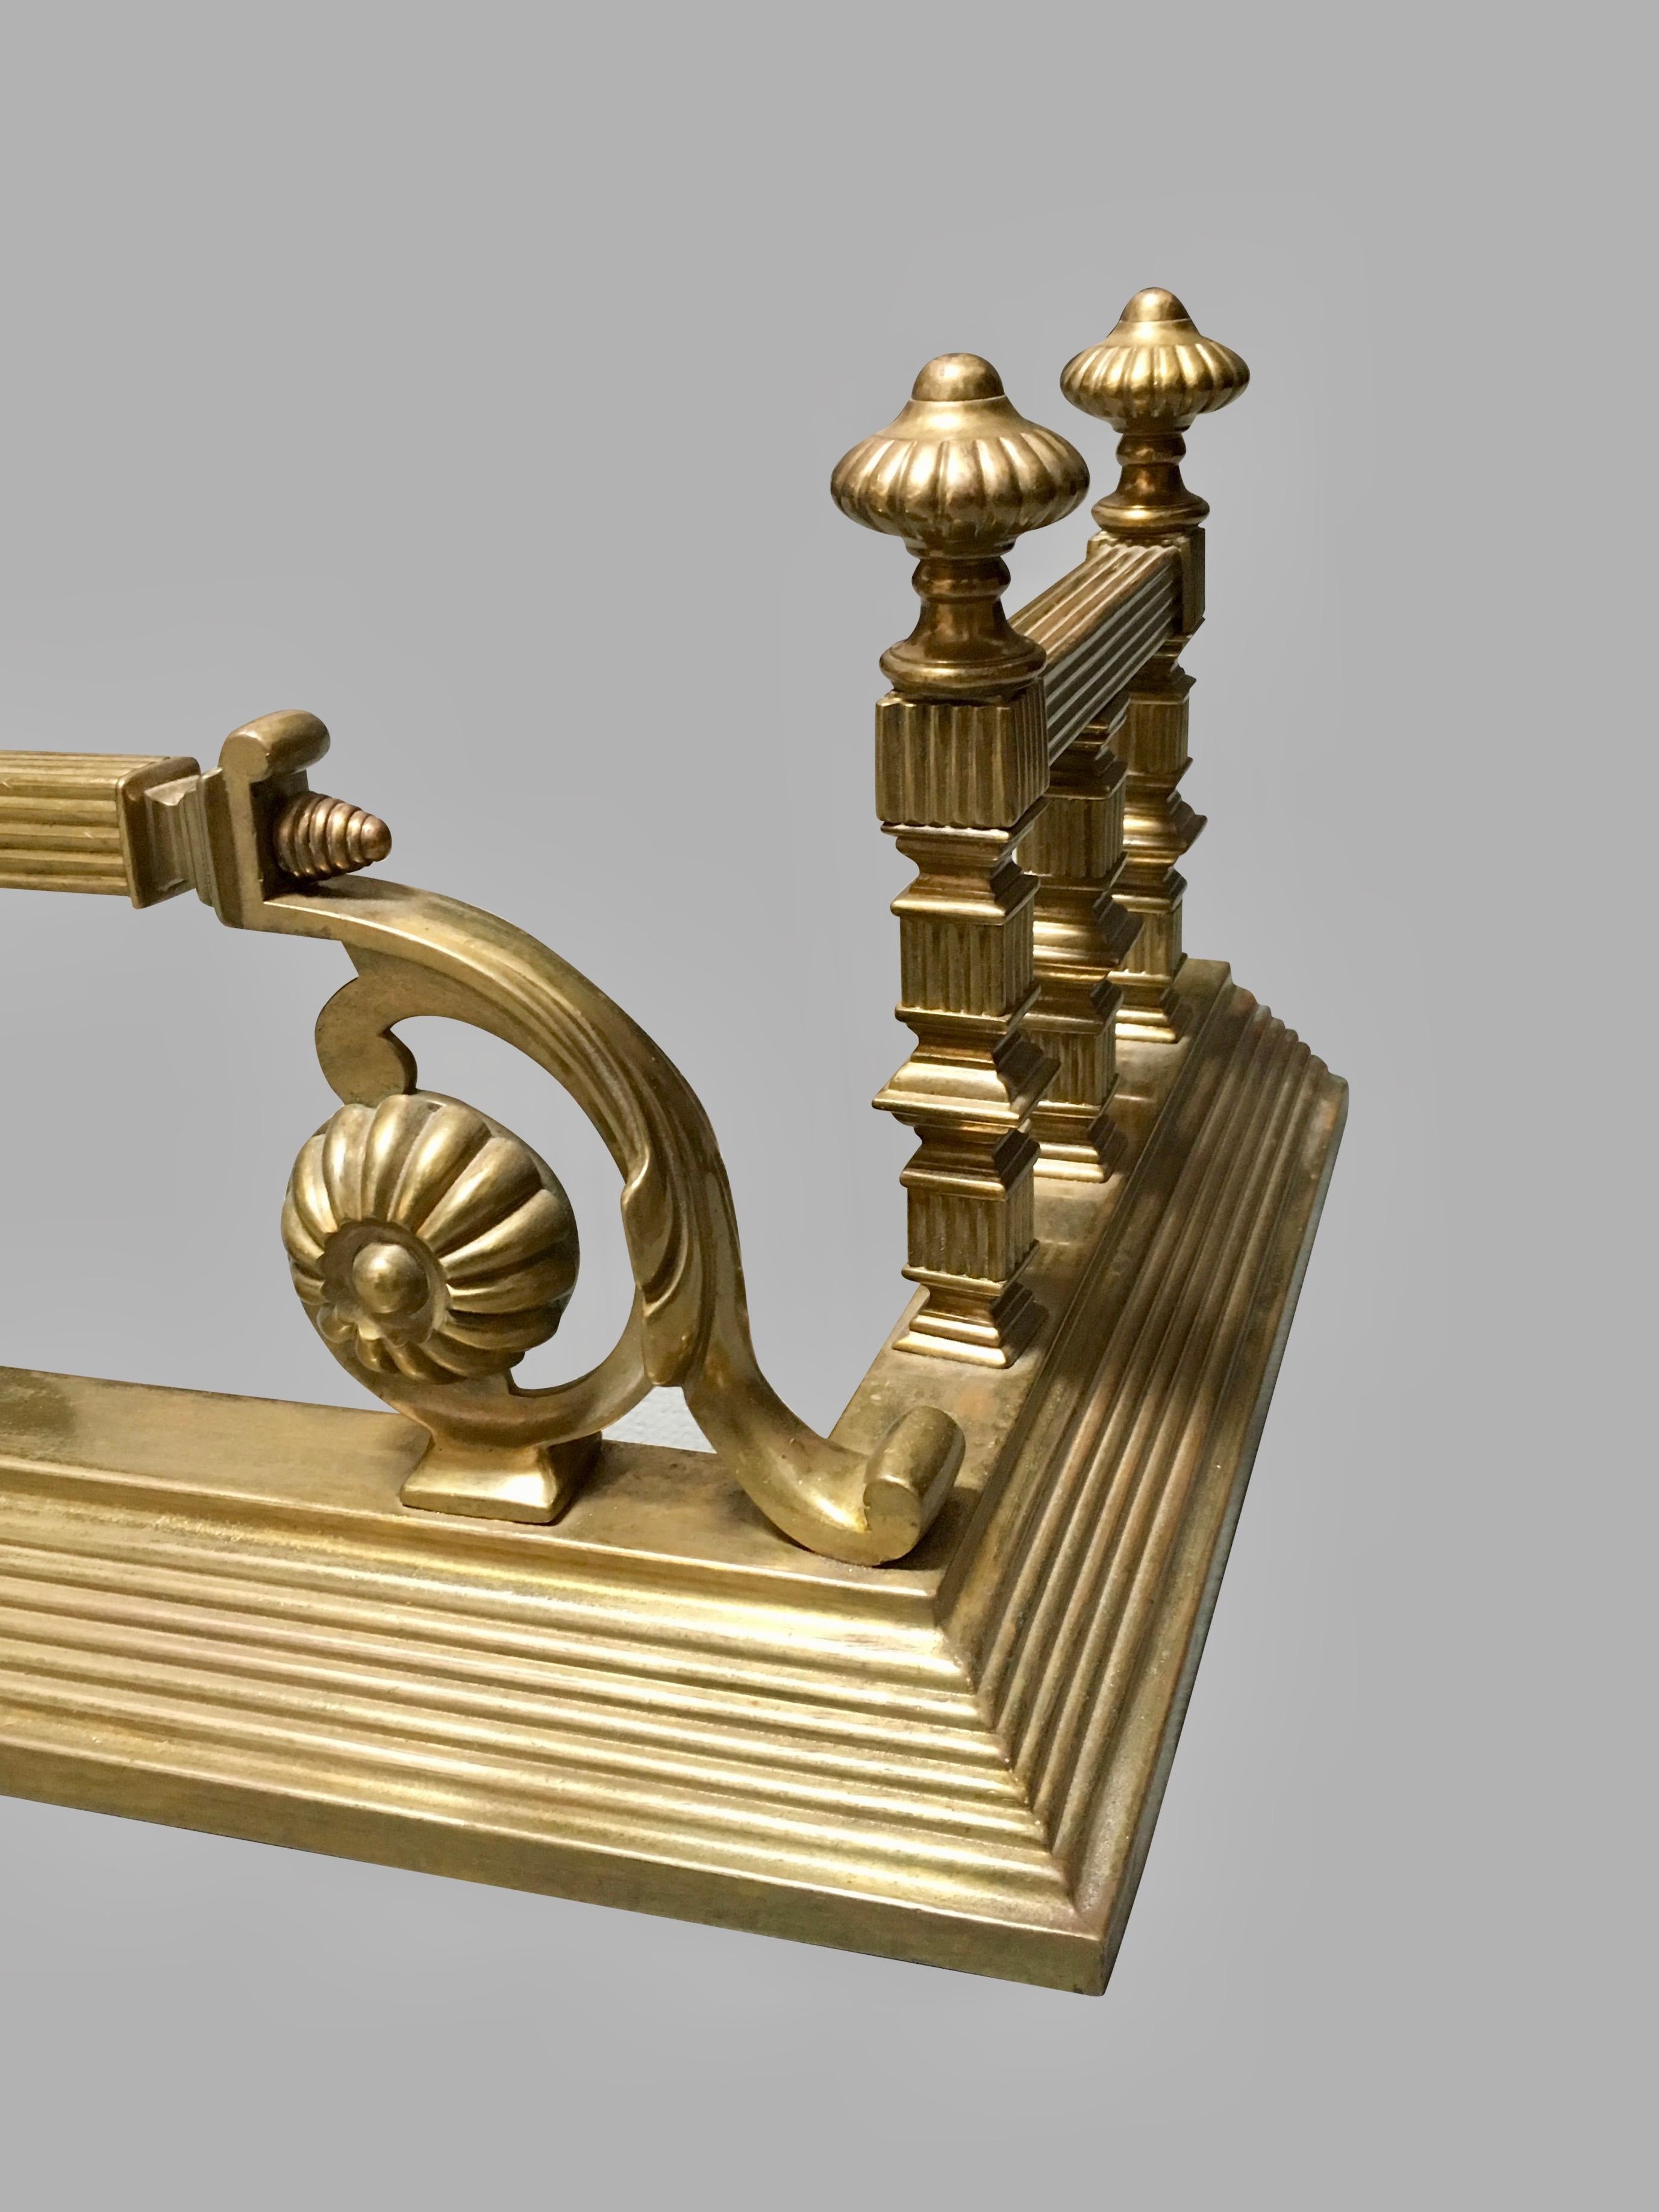 A good English Victorian brass fire fender decorated with reeded edges and shells, circa 1880.